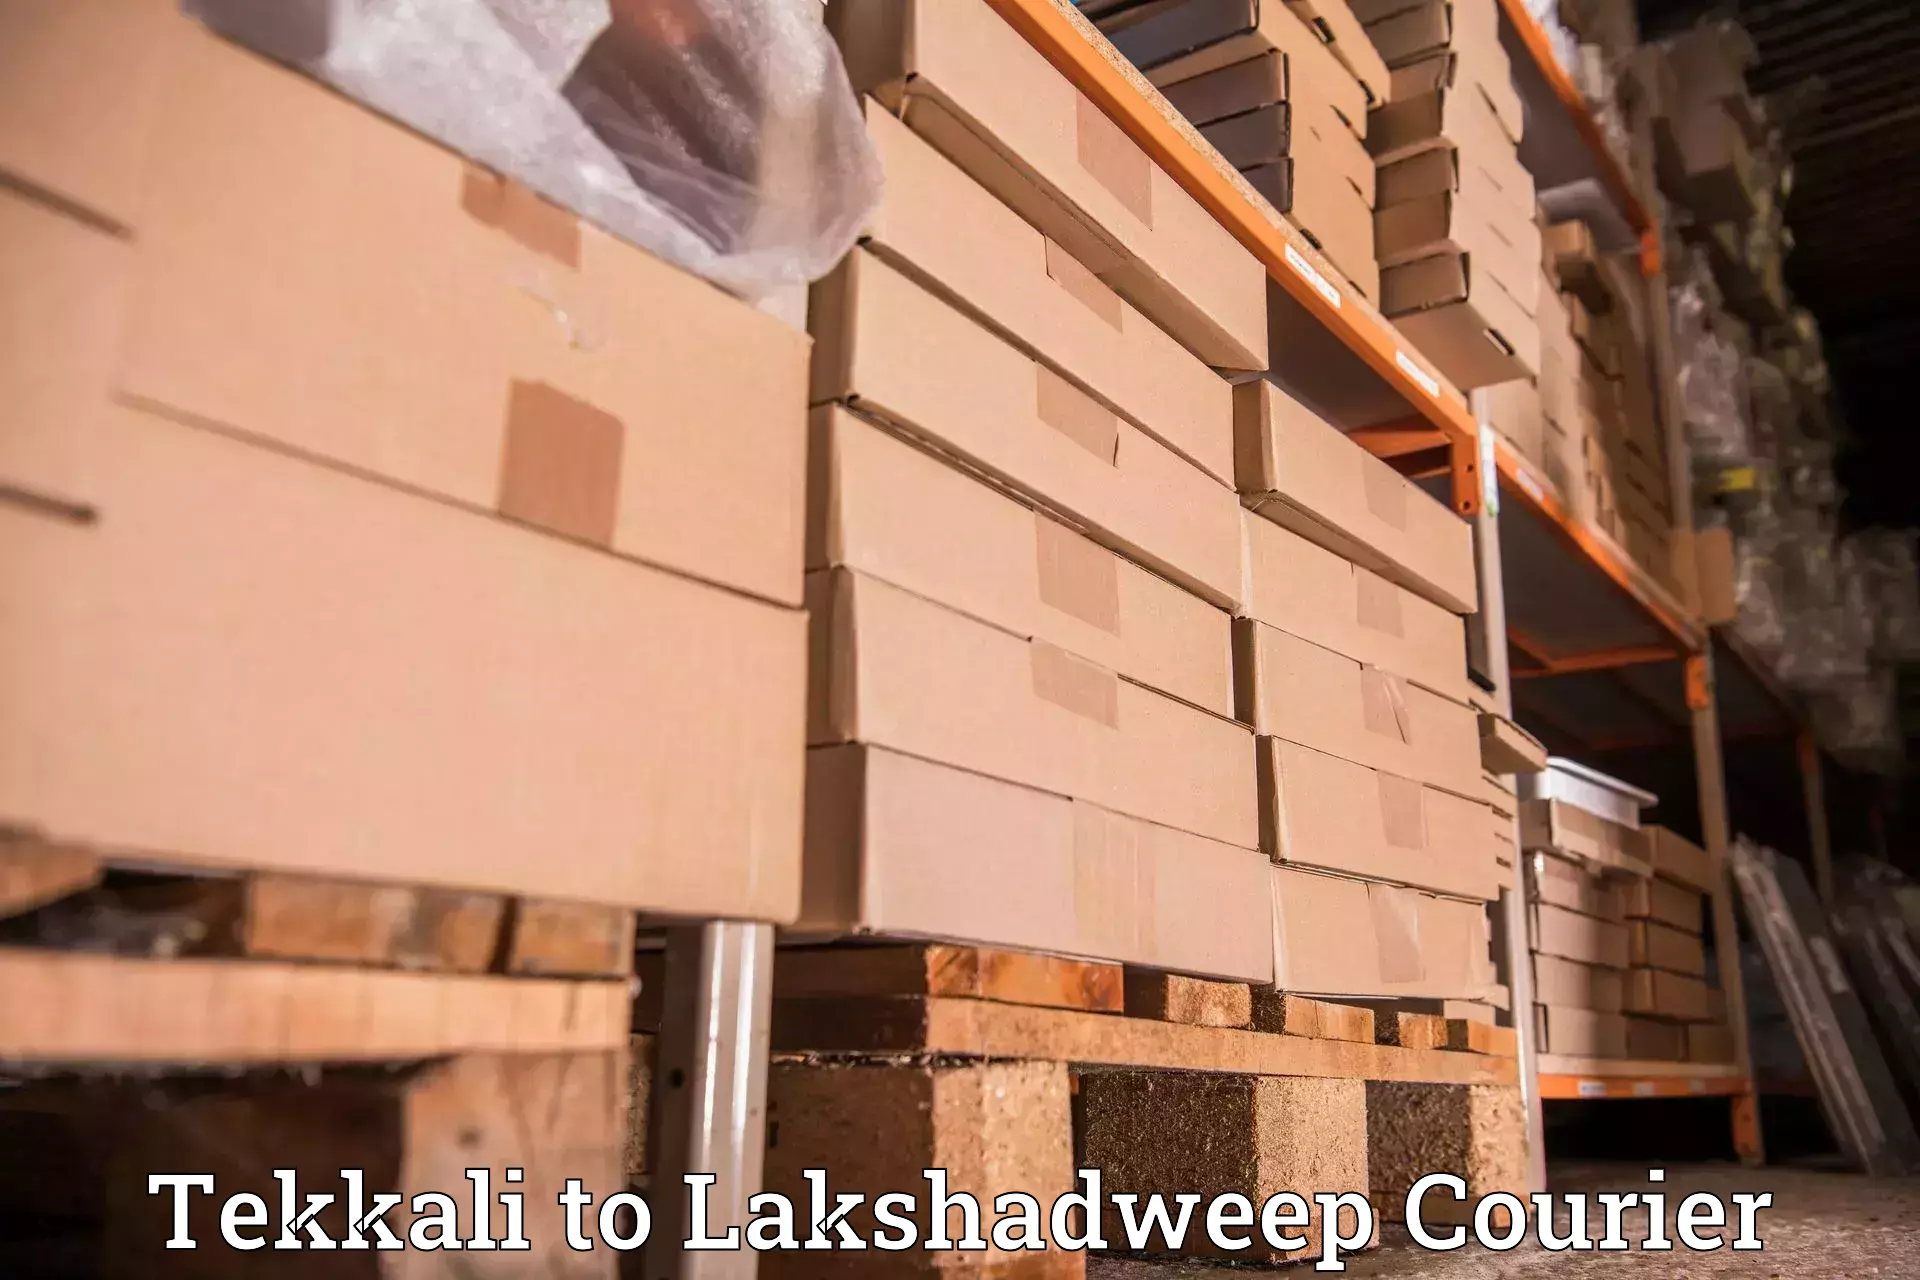 Customer-oriented courier services Tekkali to Lakshadweep